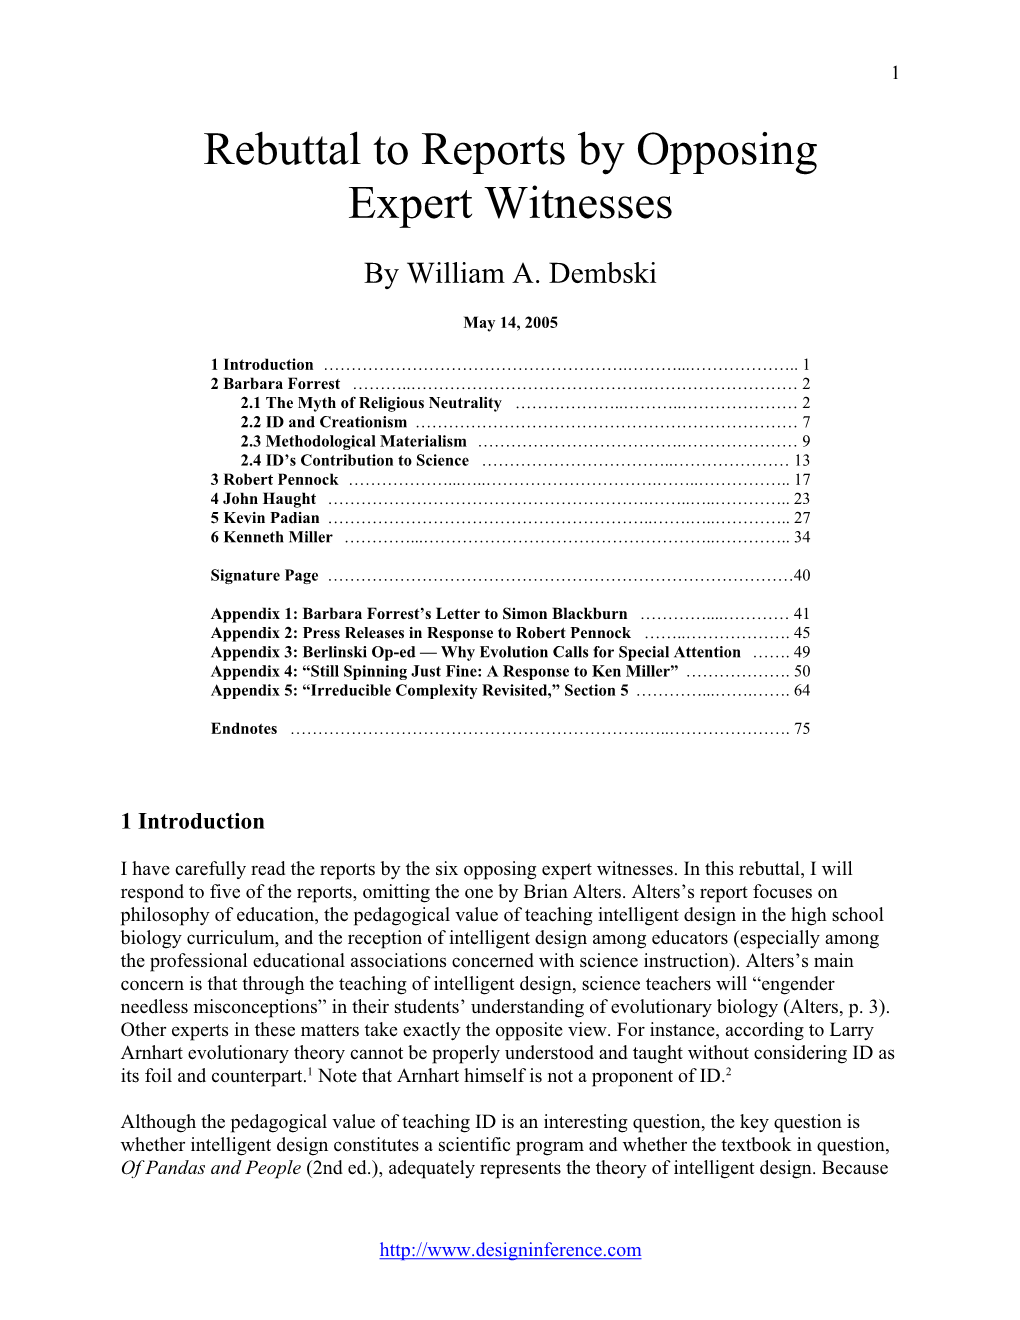 Rebuttal to Reports by Opposing Expert Witnesses